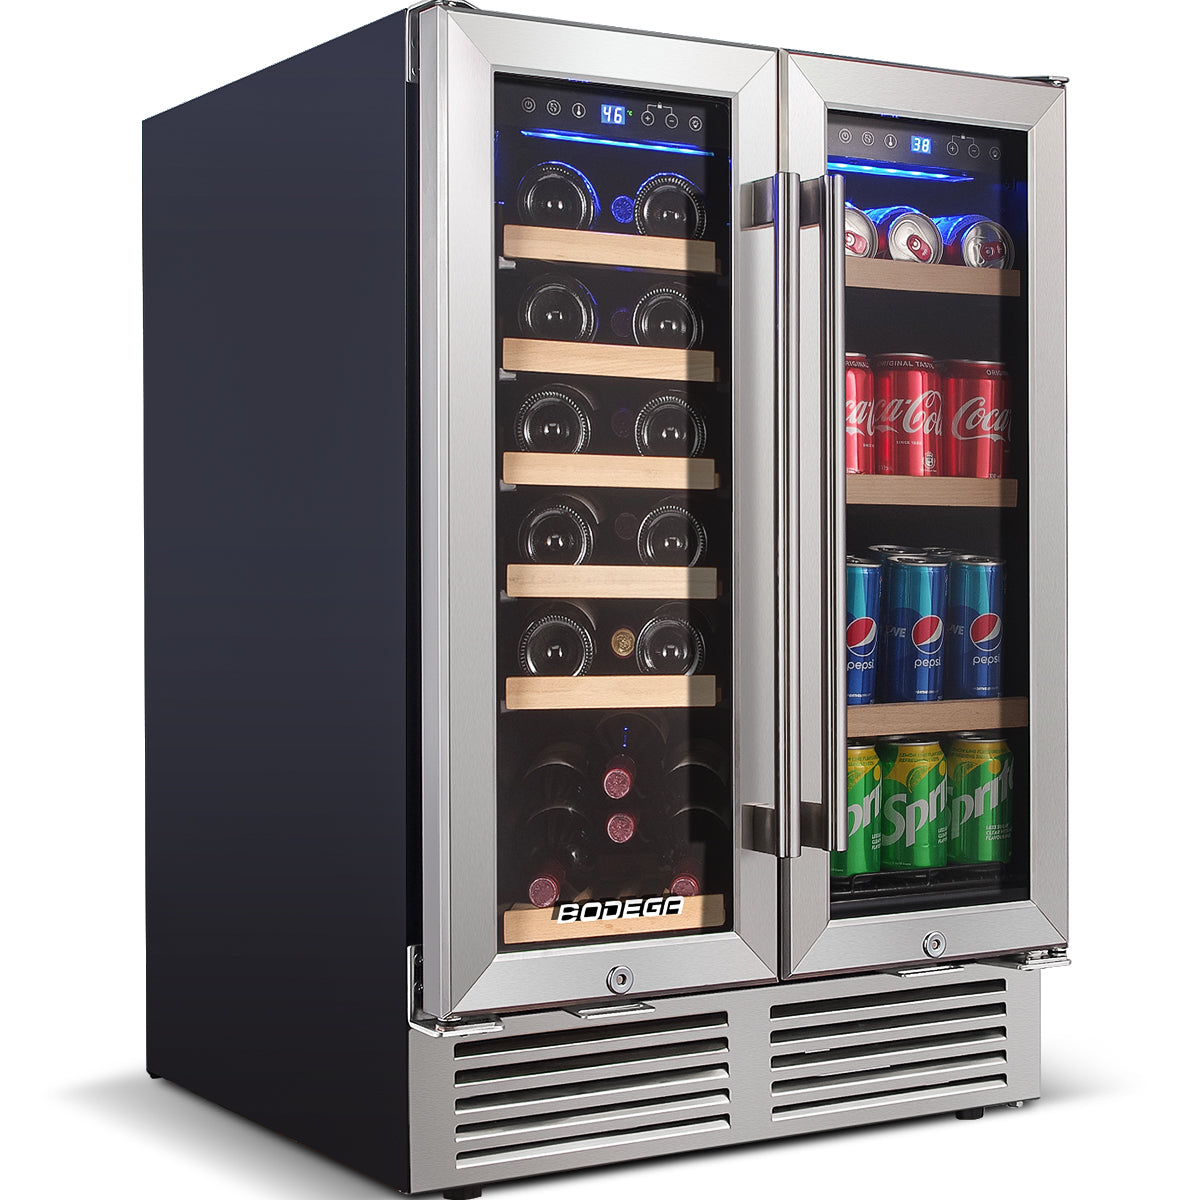 BODEGAcooler Wine and Beverage Cooler 24 Built-in Dual Zone 19 Bottles and  57 Cans